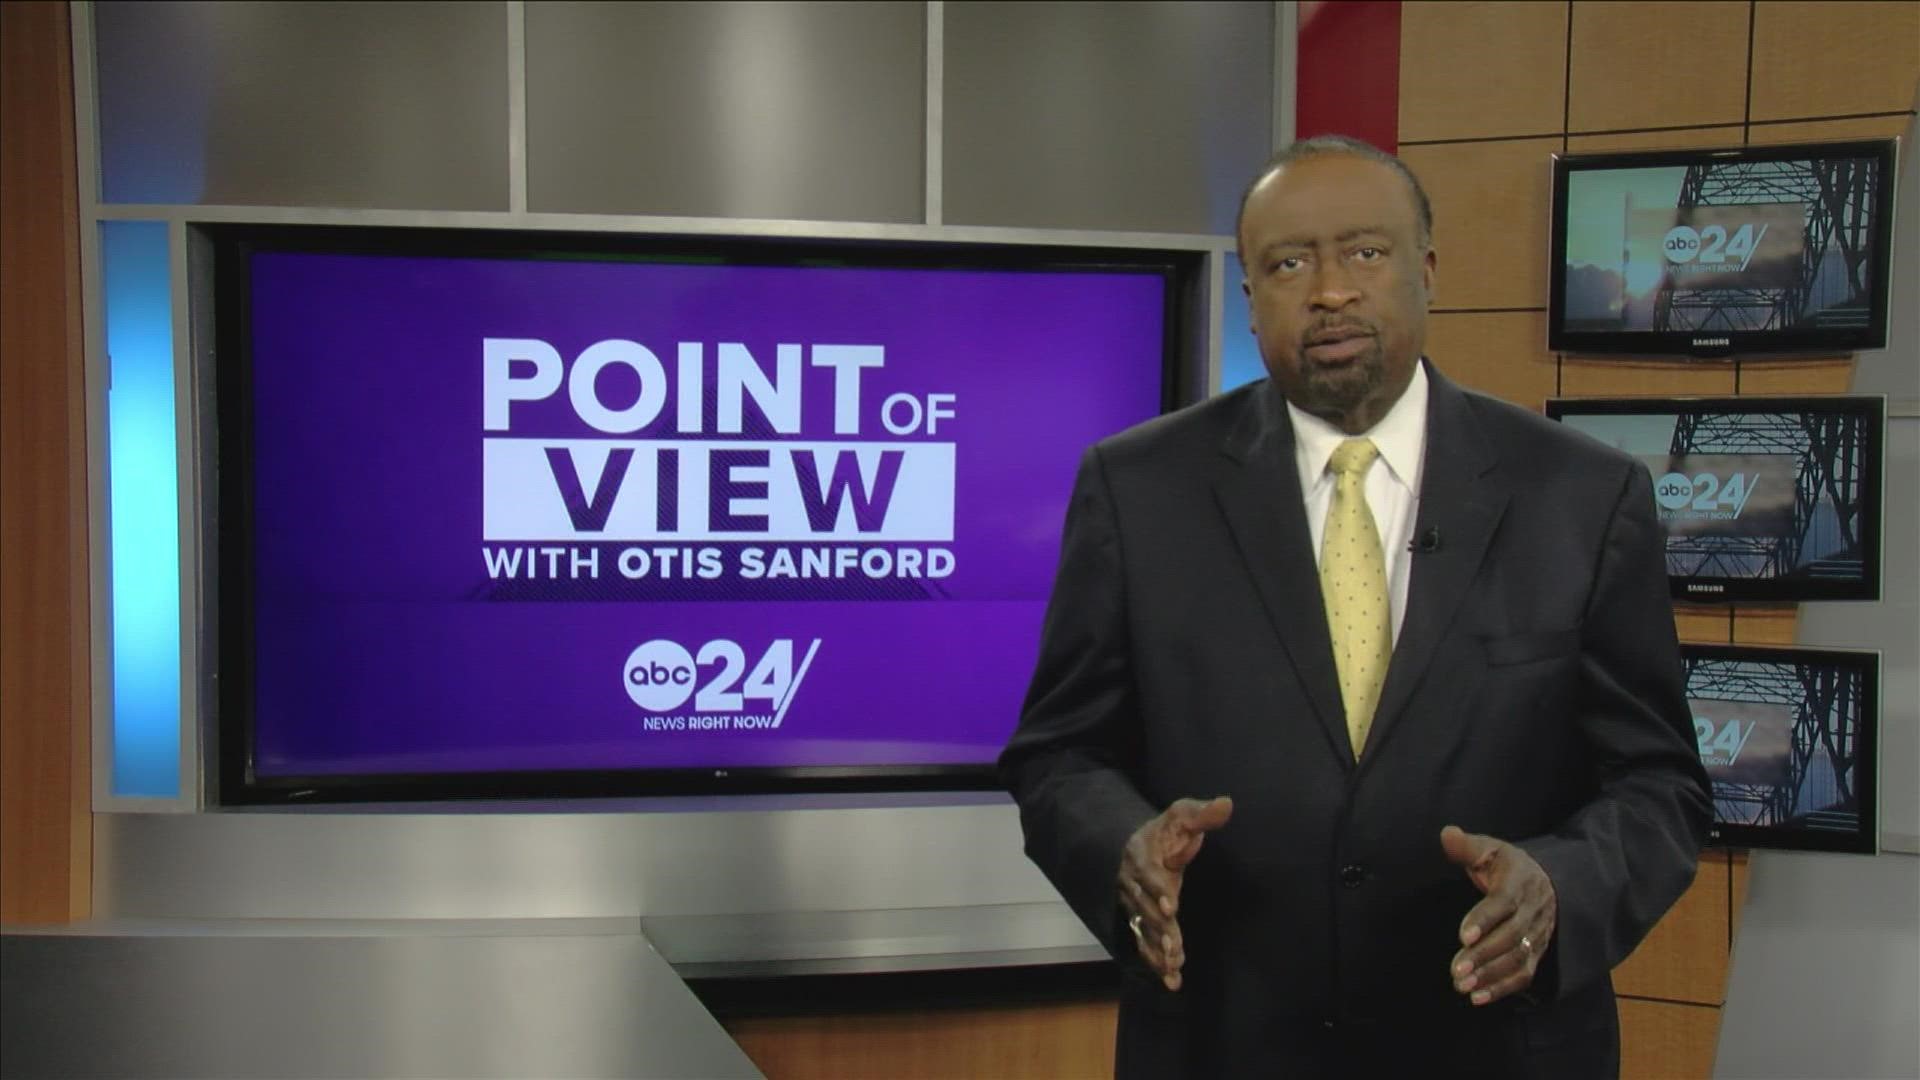 ABC24 political analyst and commentator Otis Sanford explains why he thinks council and mayoral elections shouldn't be made partisan.